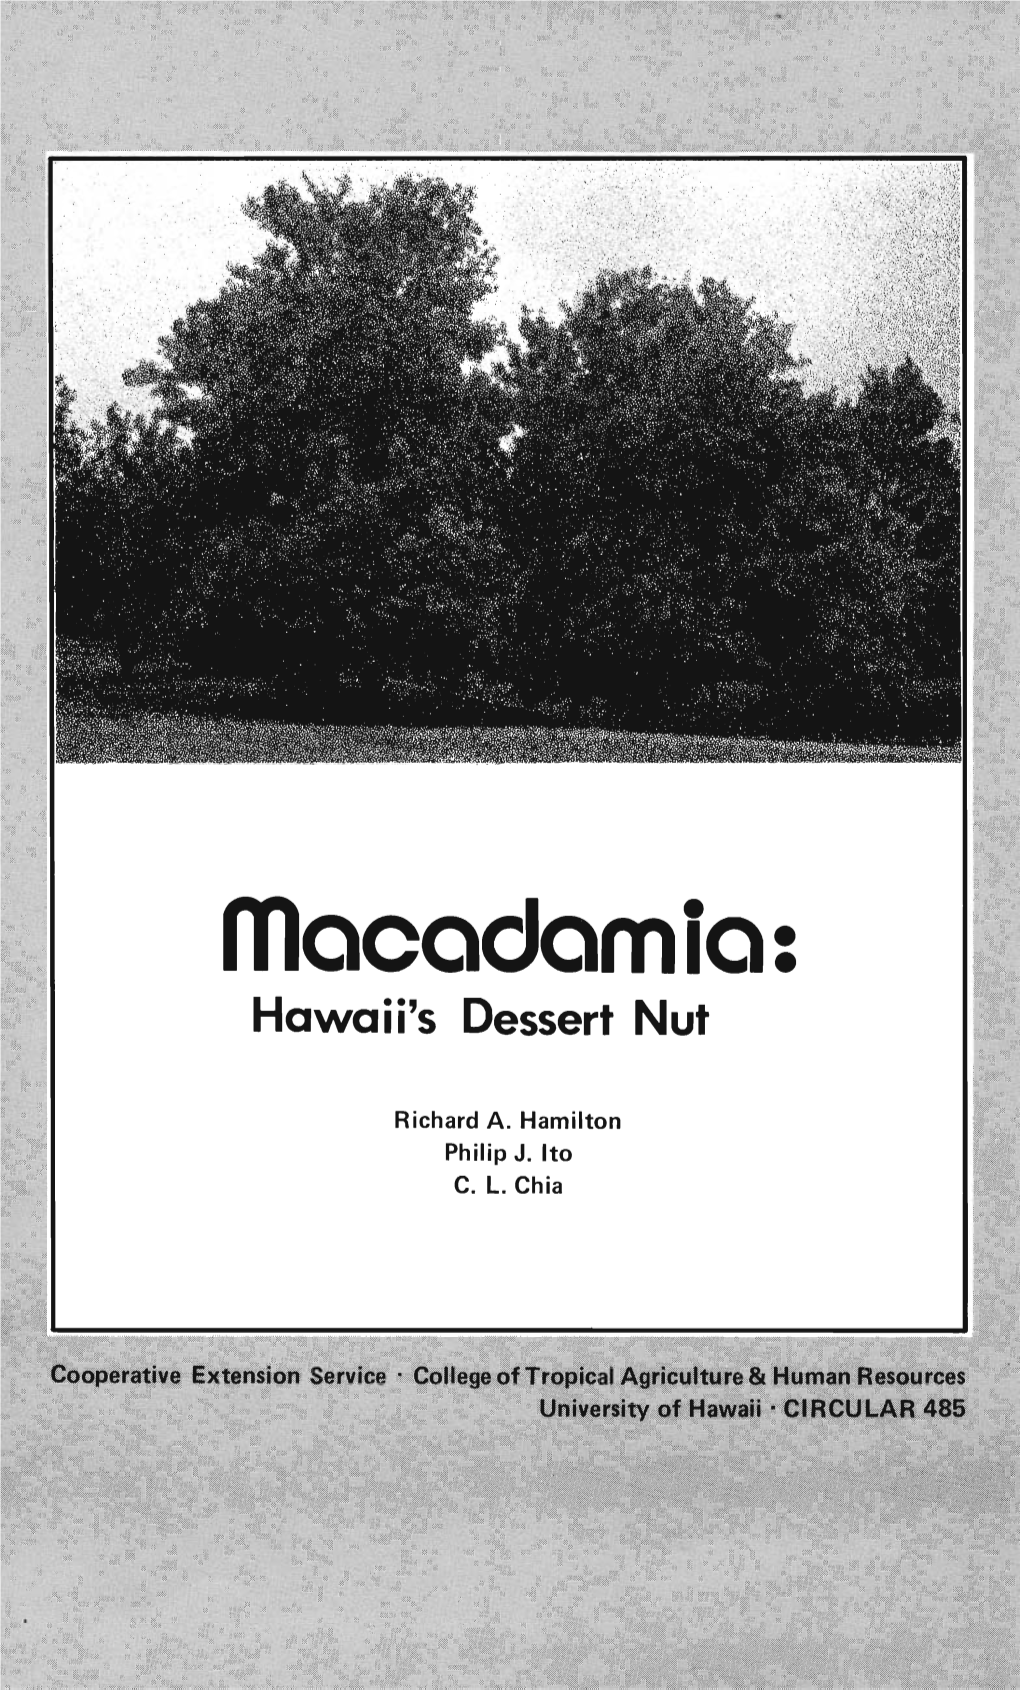 Macadamia Trees in the World, 25-Year-Old Trees of the 'Keauhou' Variety at the Kona Research Station in Hawaii